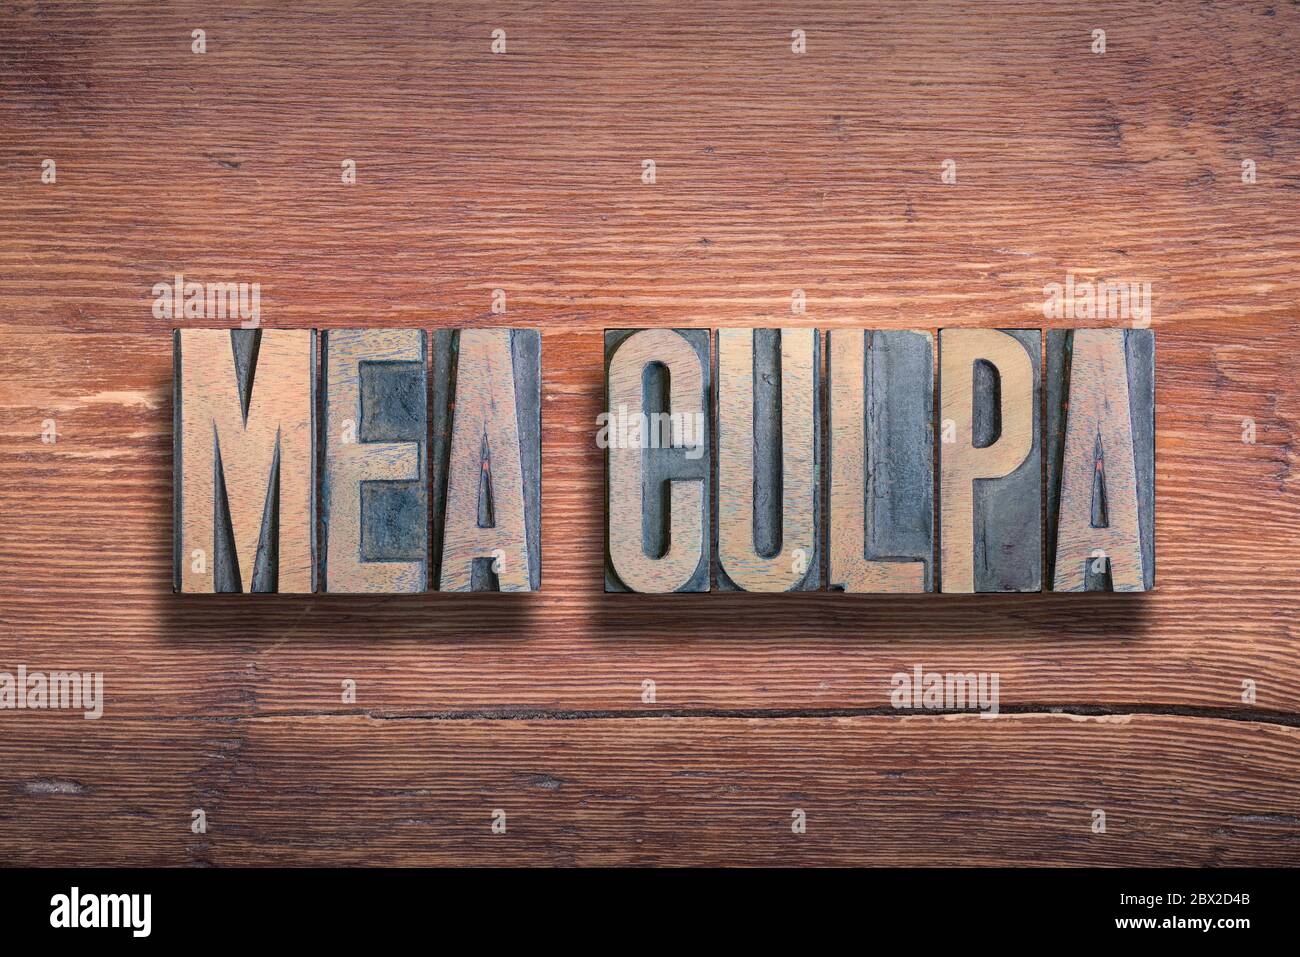 mea culpa ancient Latin saying meaning «through my fault» combined on vintage varnished wooden surface Stock Photo